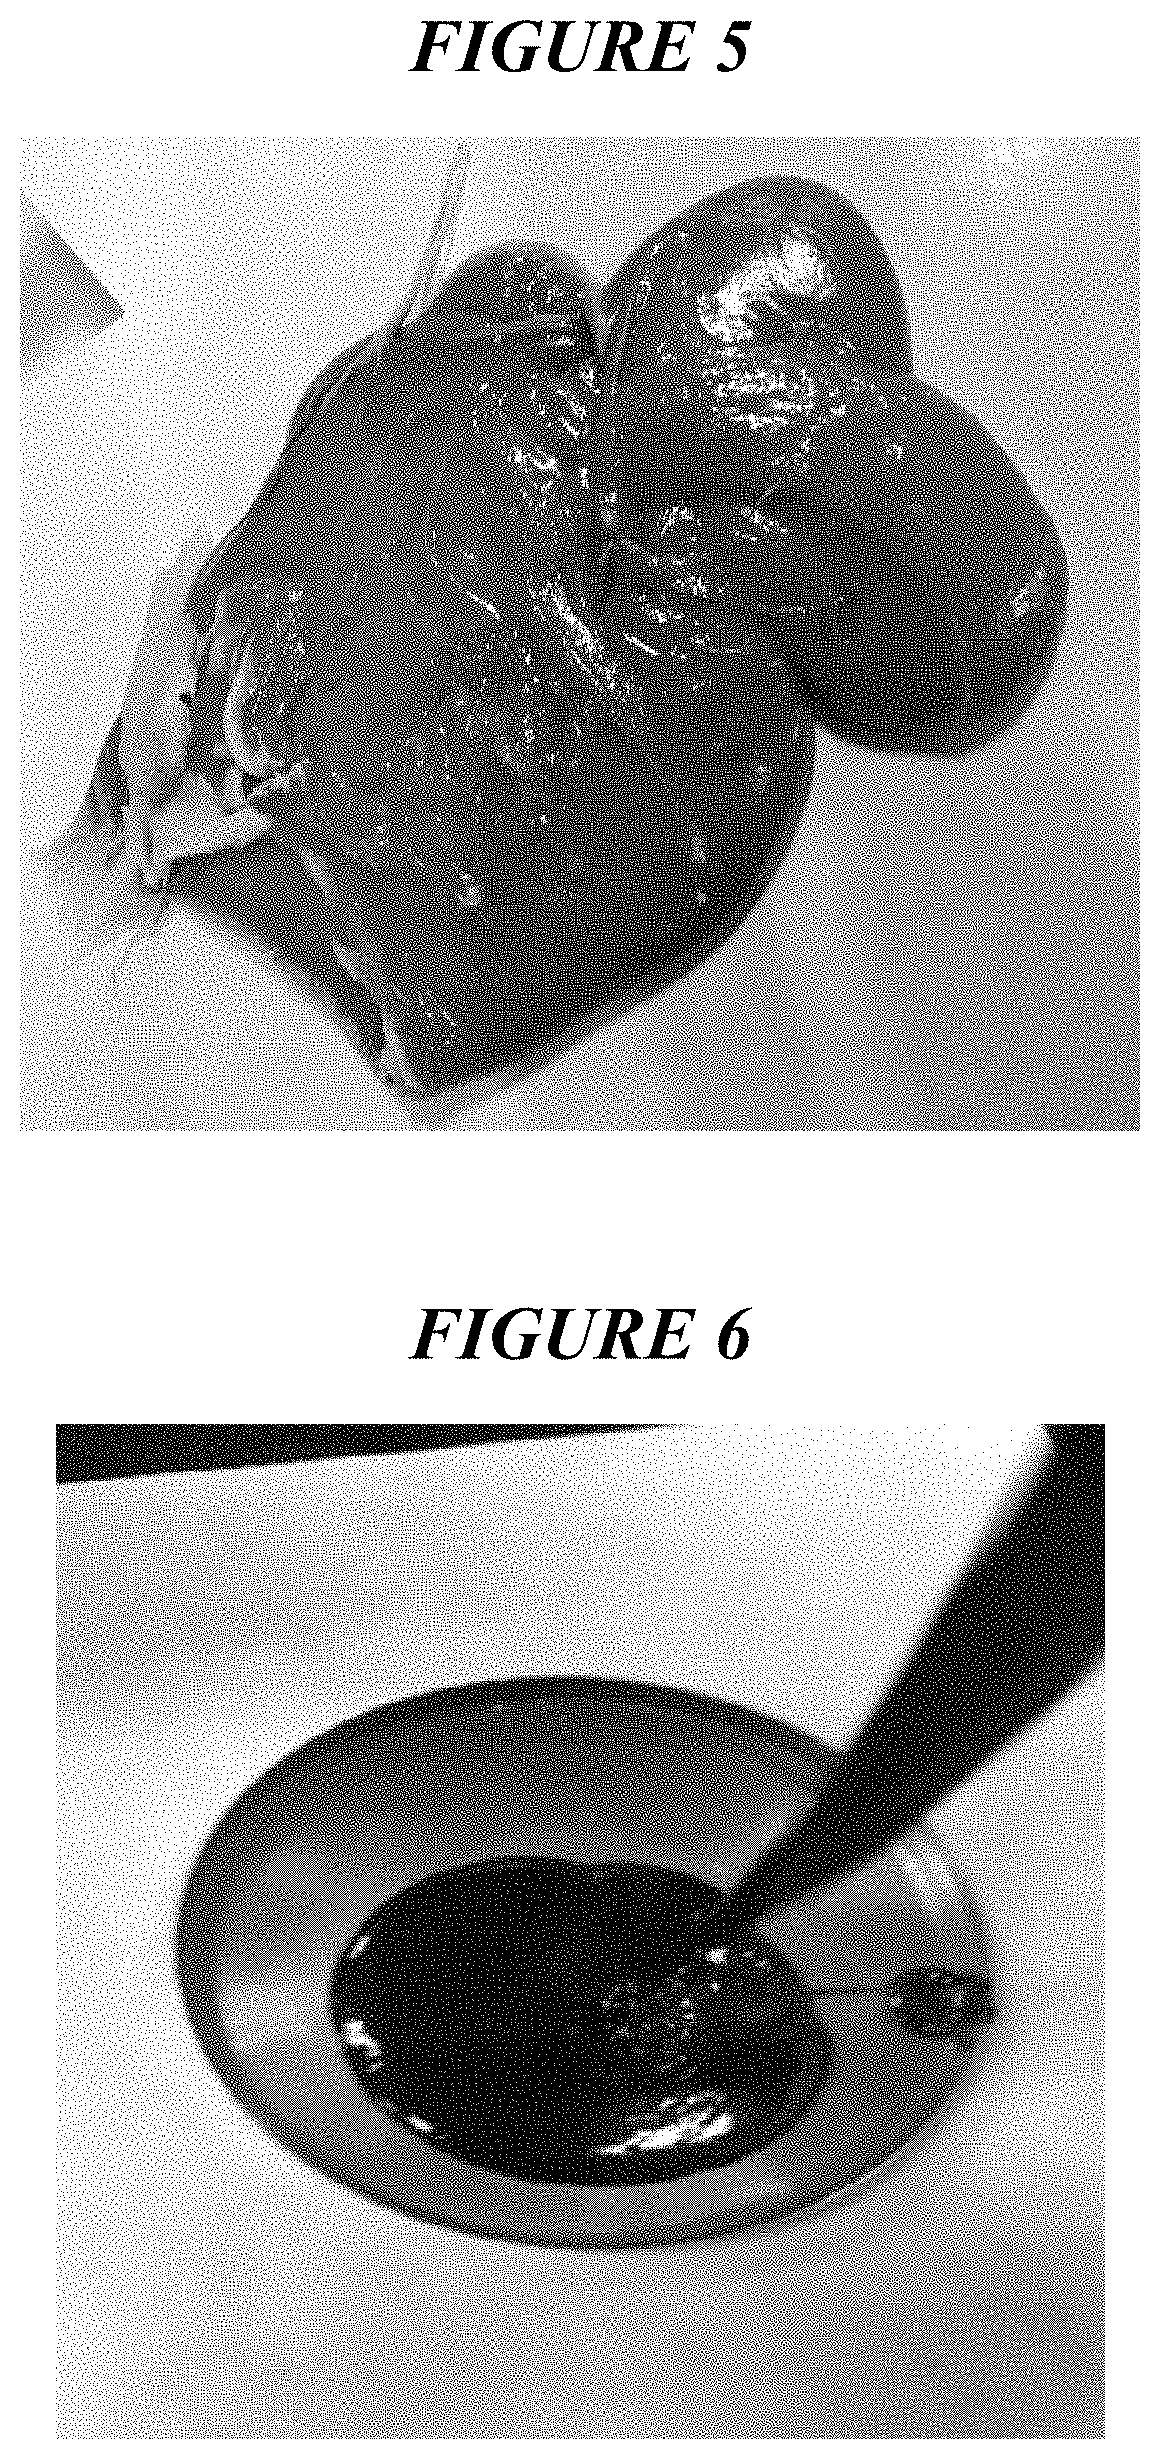 Non-asphaltic coatings, non-asphaltic roofing materials, and methods of making thereof